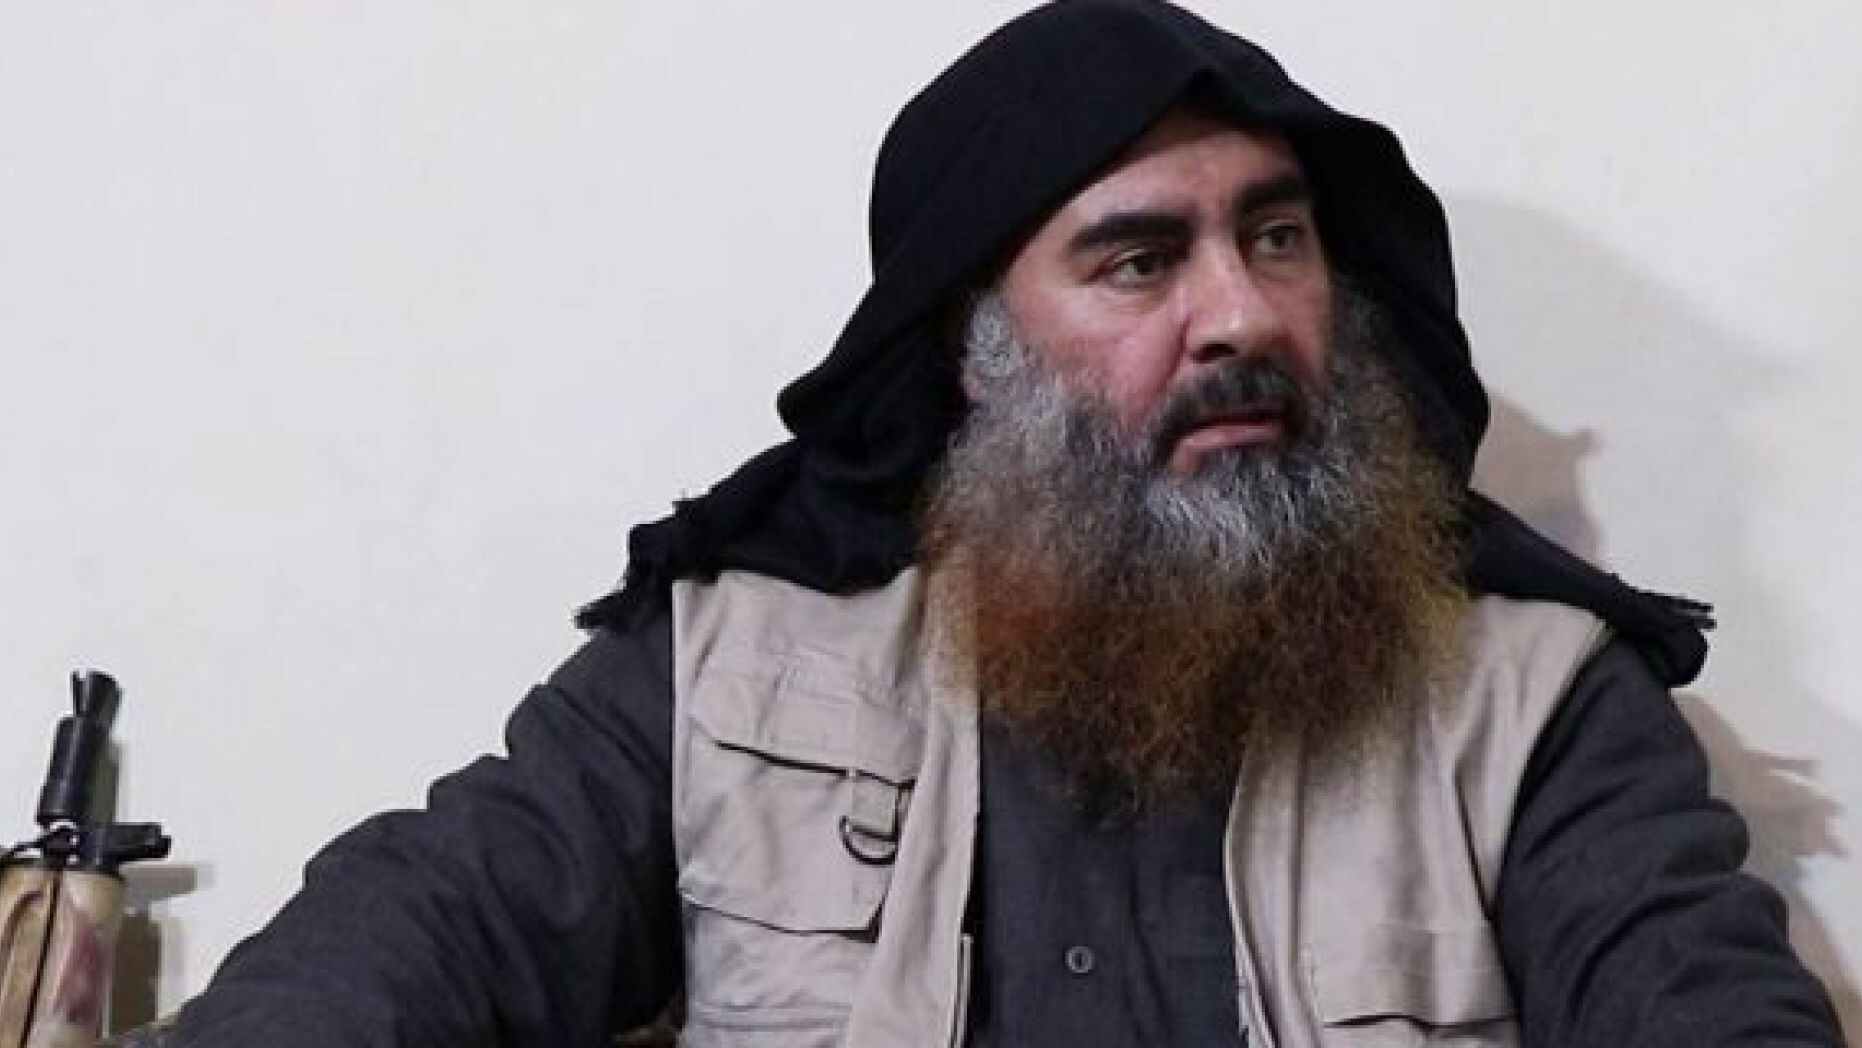 LLL - GFATF - Al Baghdadis hideout was equipped with frequently used internet connection